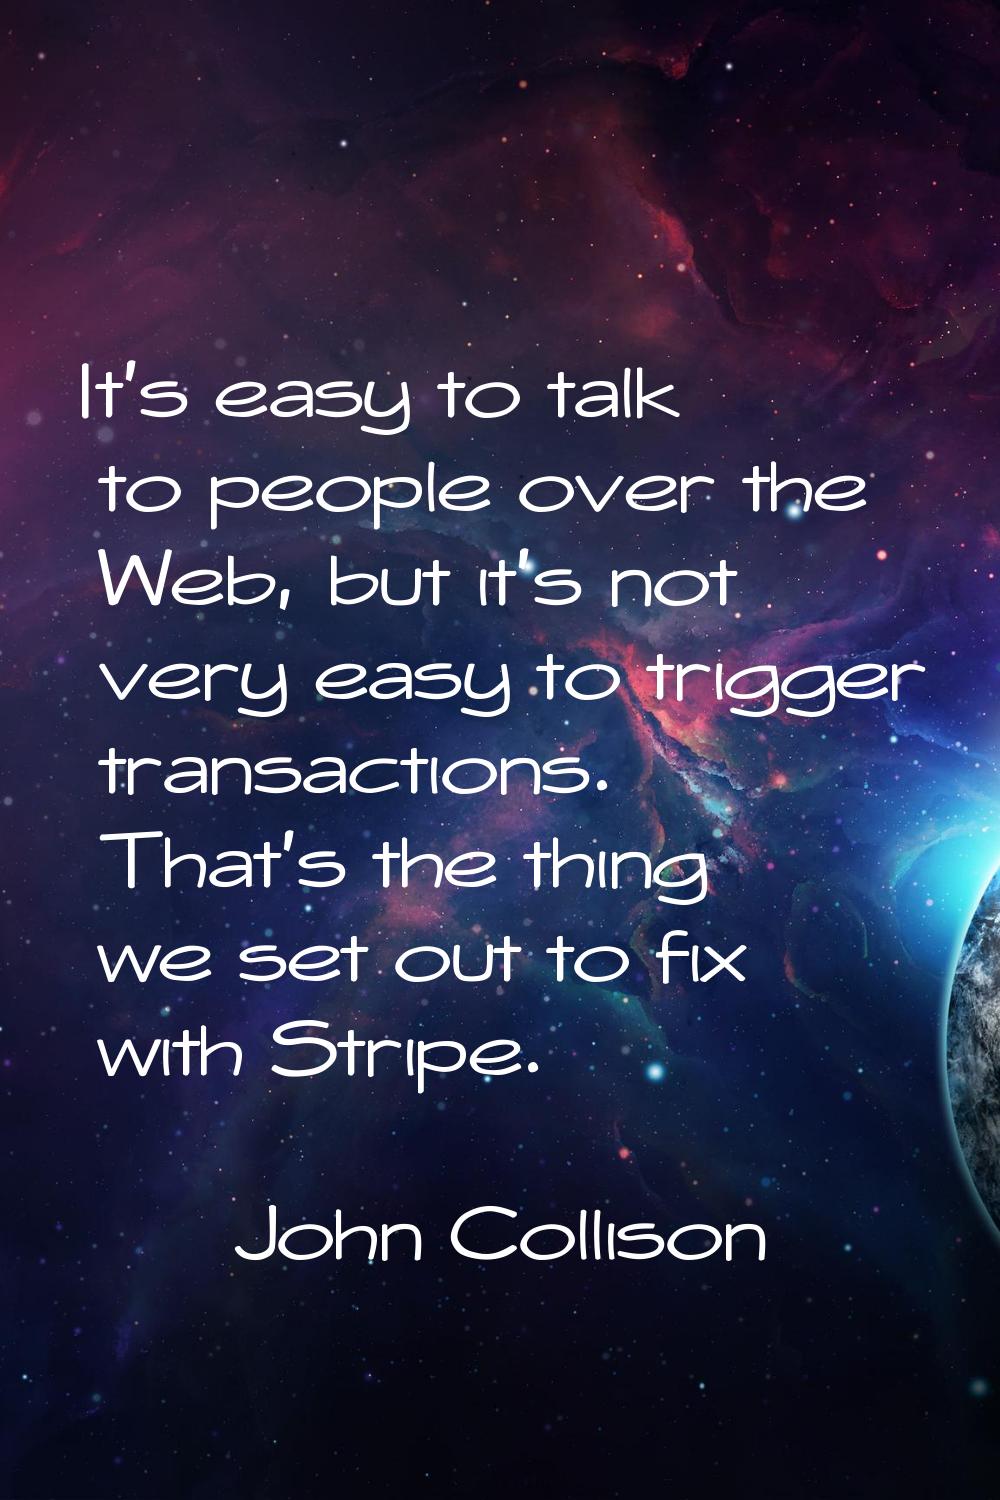 It's easy to talk to people over the Web, but it's not very easy to trigger transactions. That's th